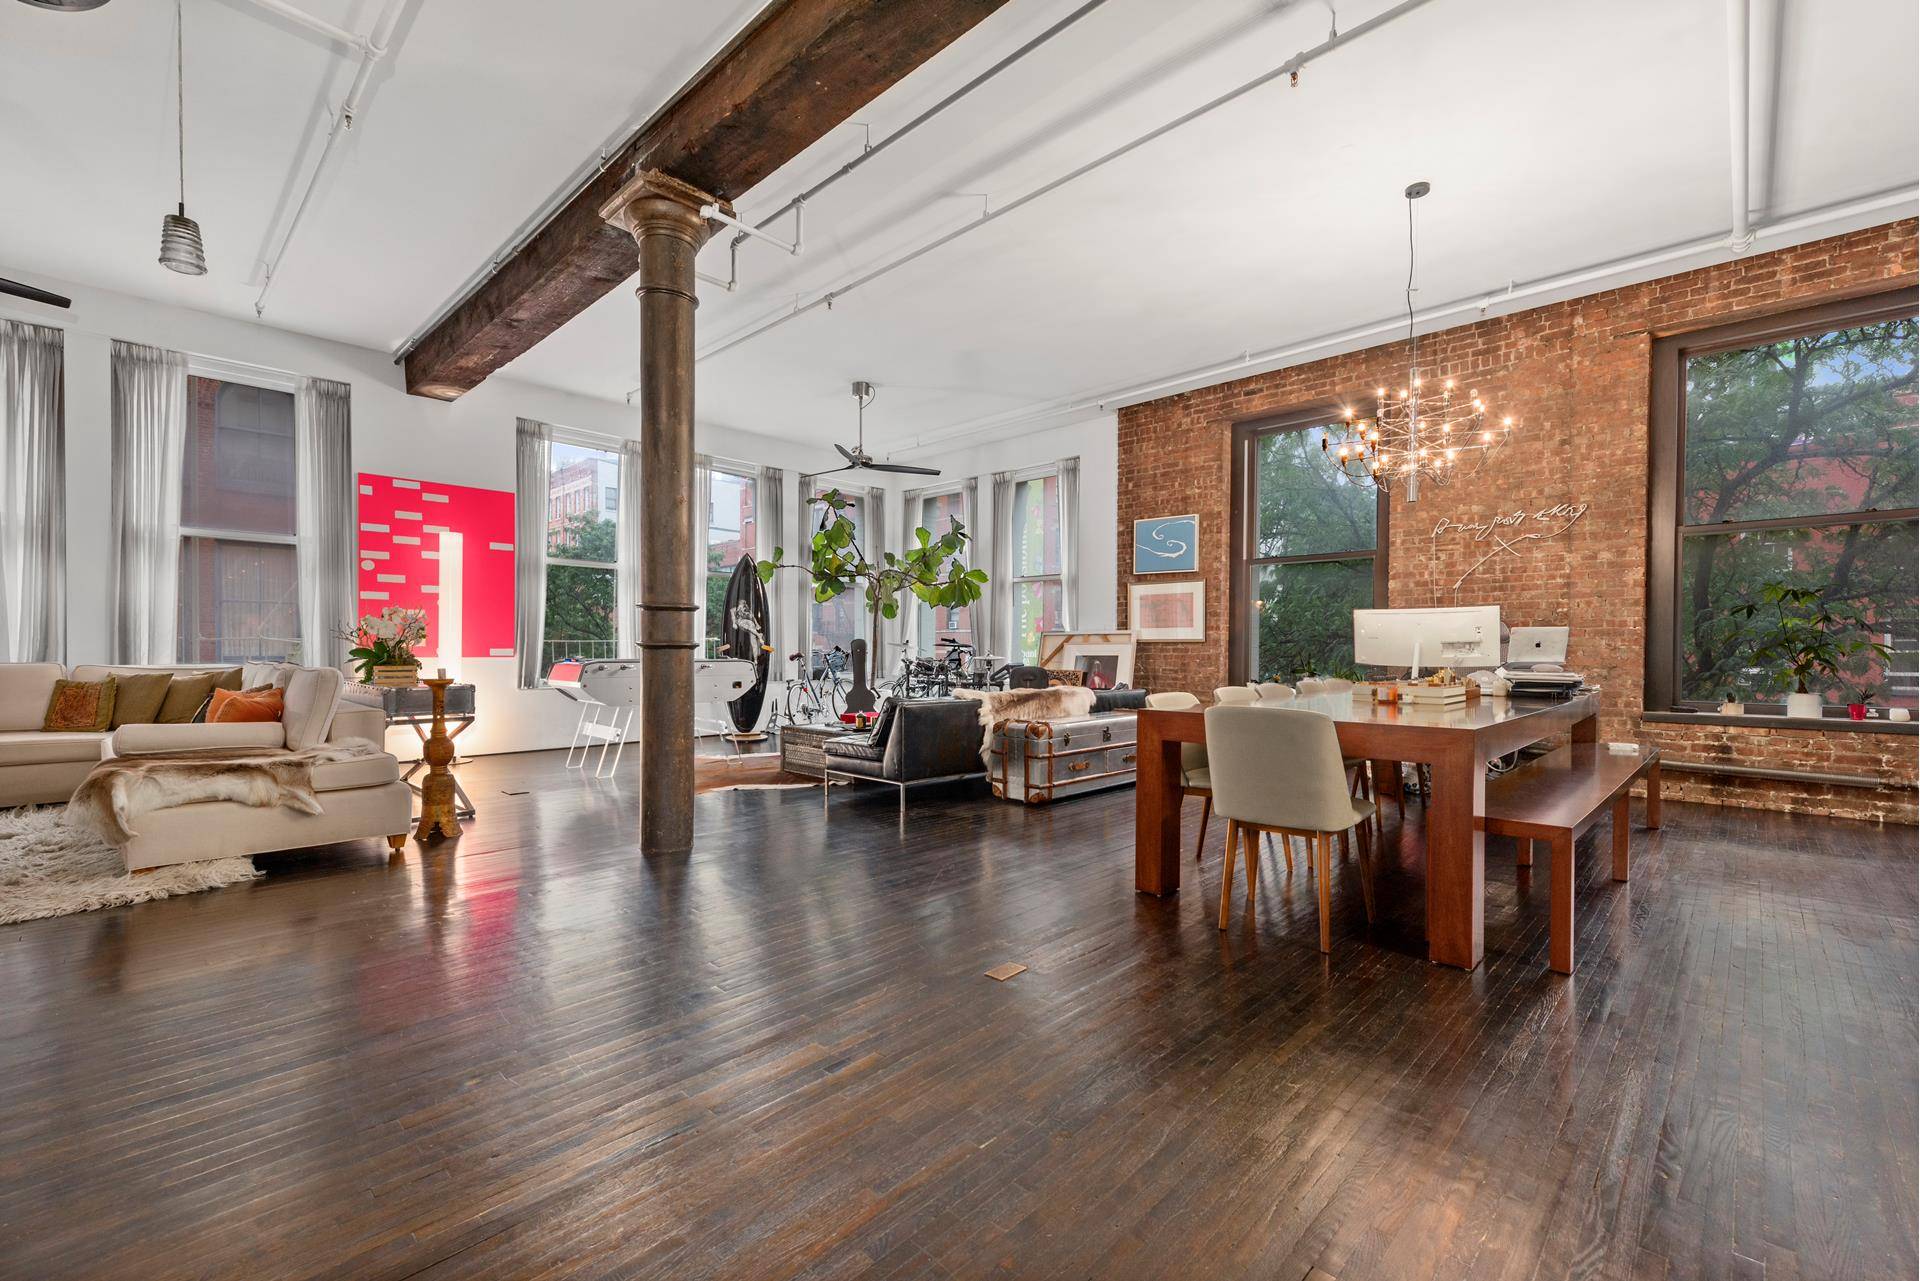 Welcome to unit 2 at 143 Prince A phenomenal 2 Bedroom 2 bathroom prime and original Soho loft.